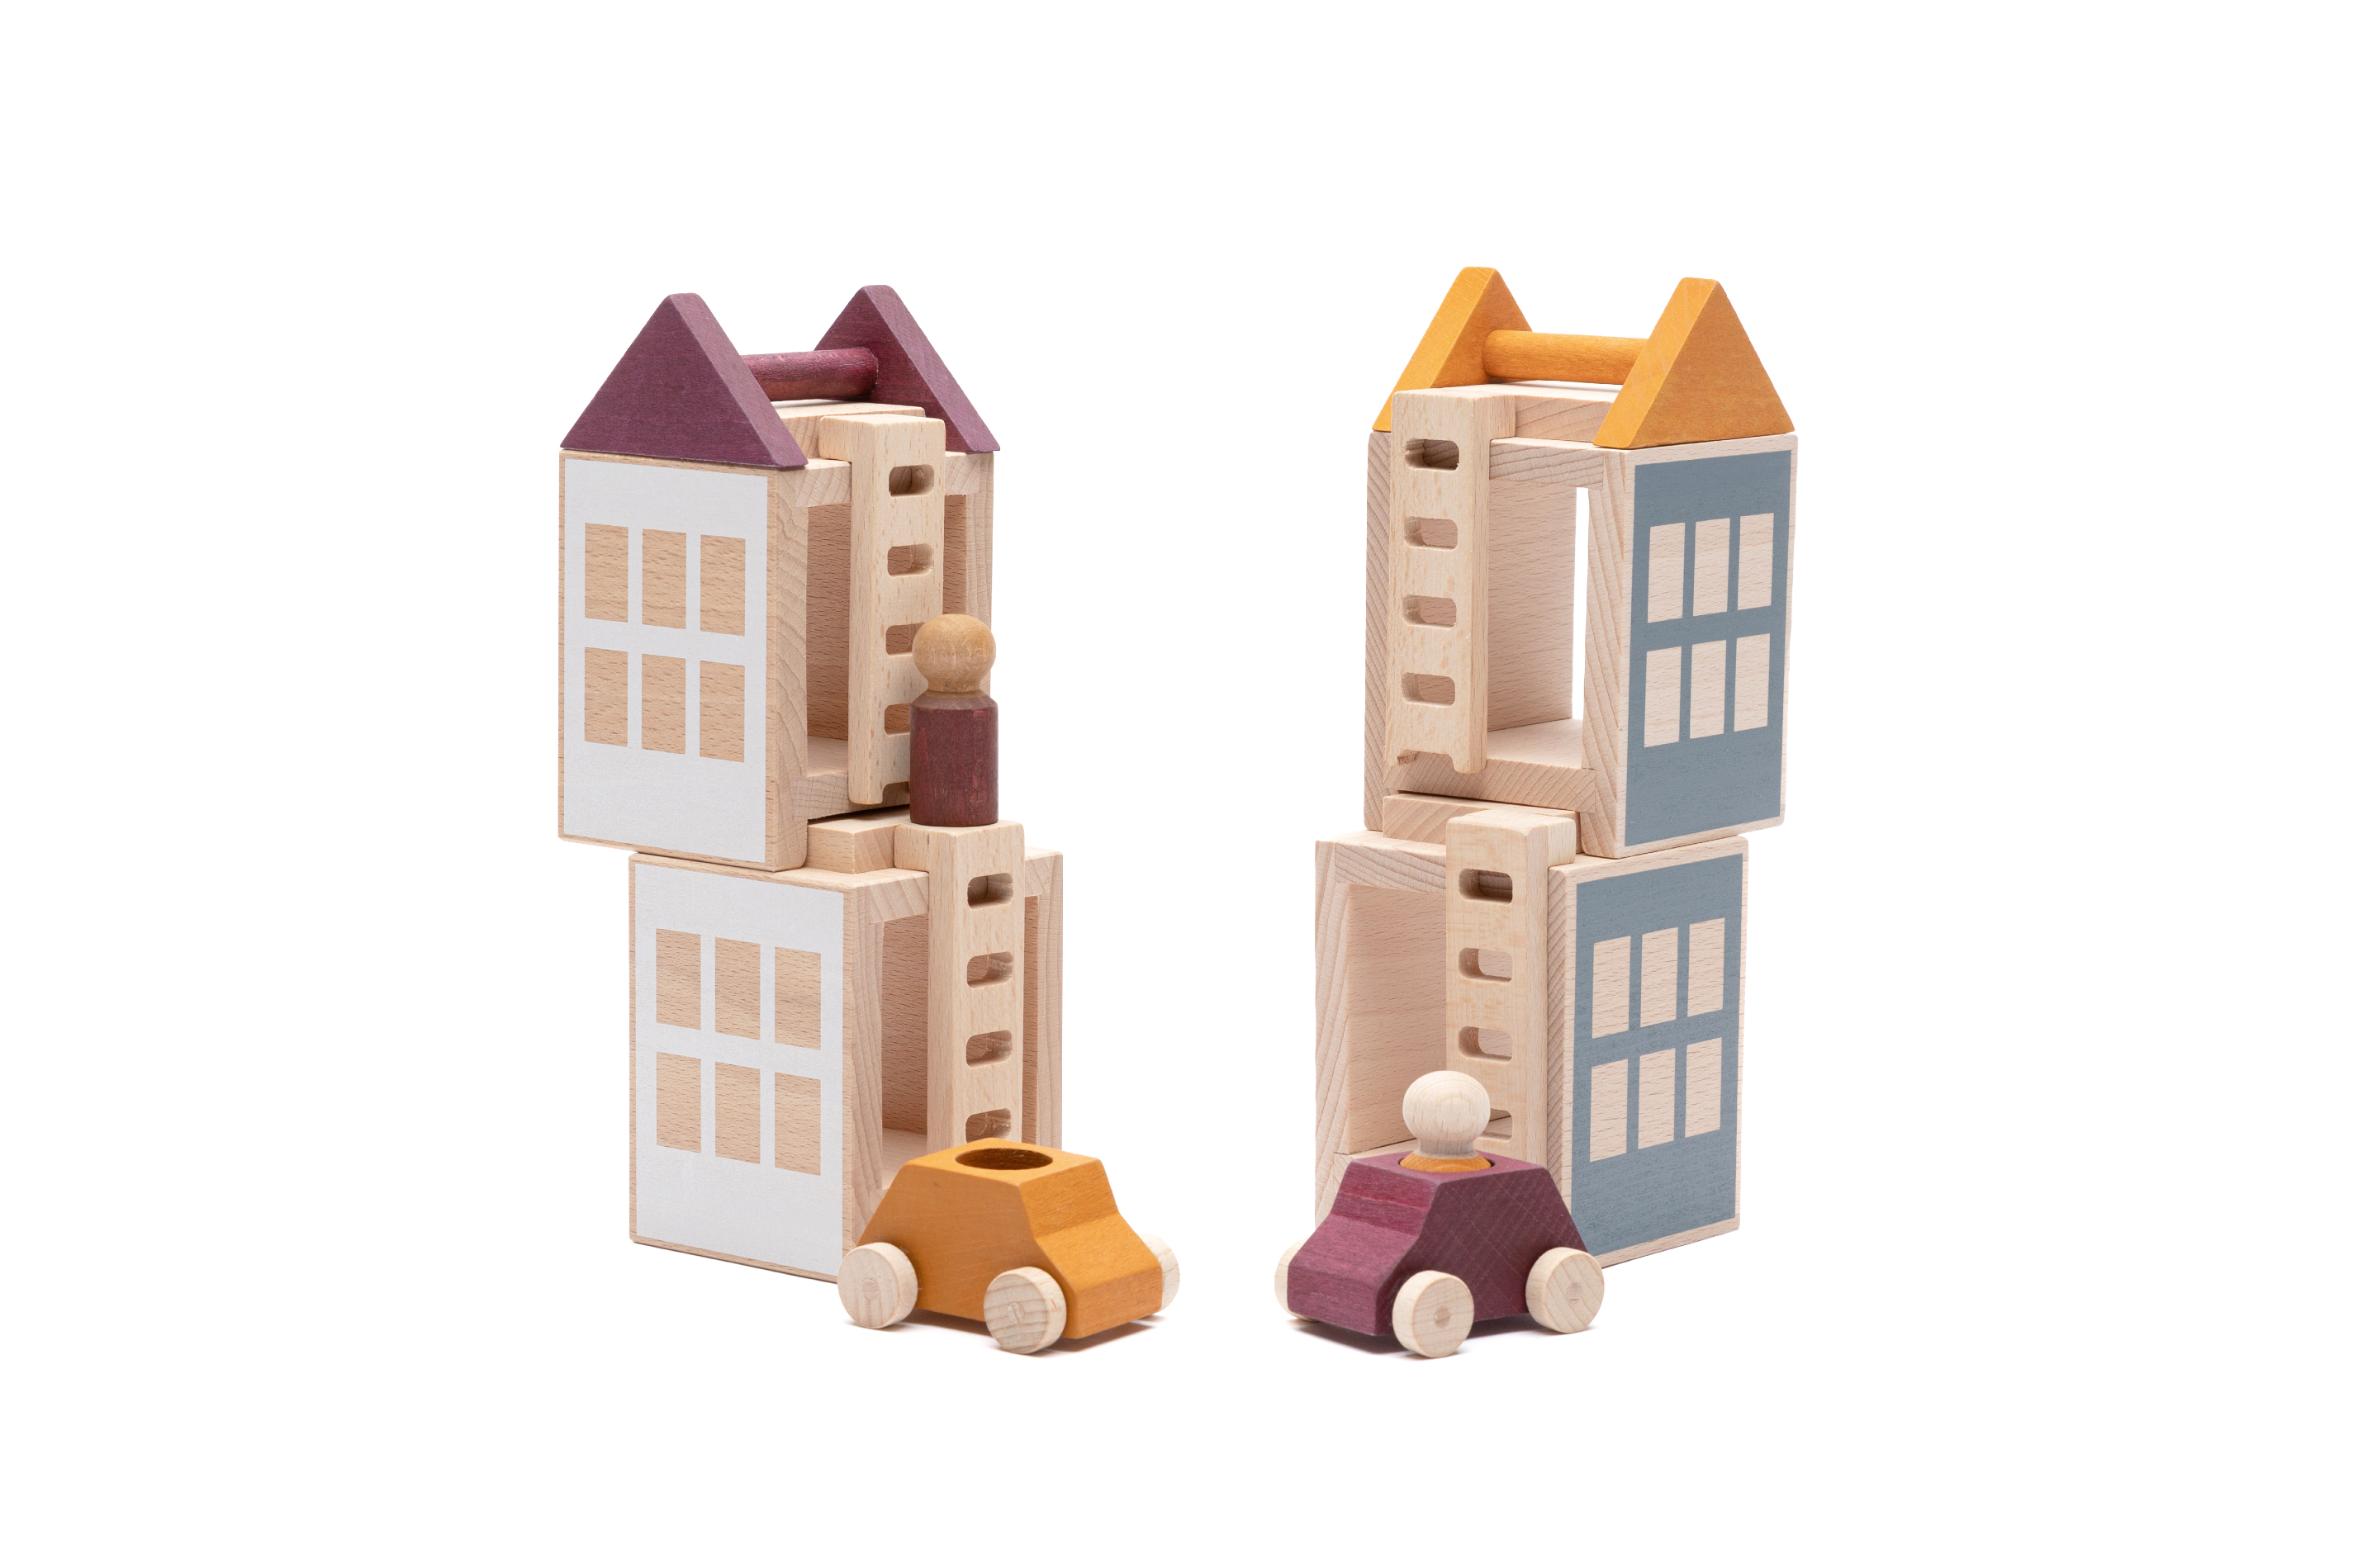 Lubulona Maxi Town Educational and Creative Construction Toy